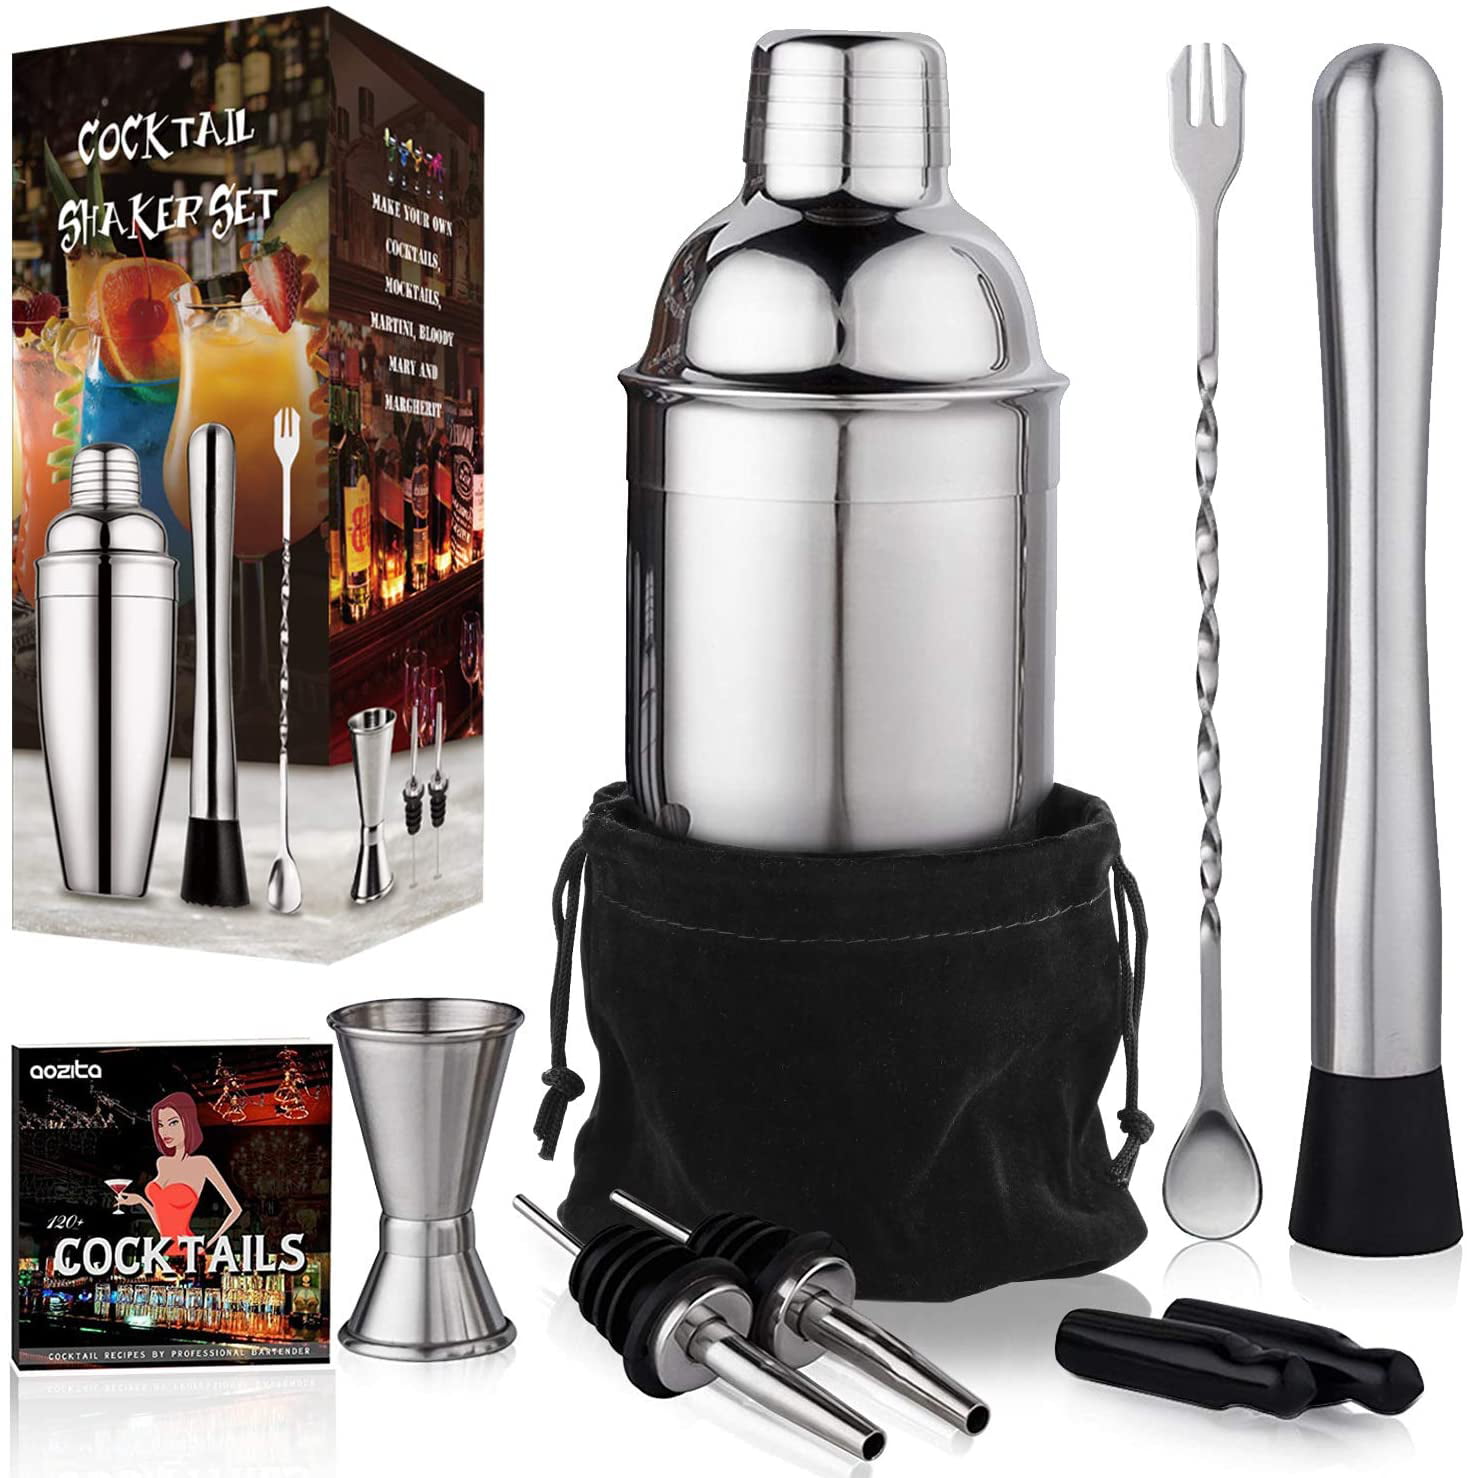 Cocktail Shaker Set Stainless Steel Bartending Kit with 24 Ounce Cocktail Shake